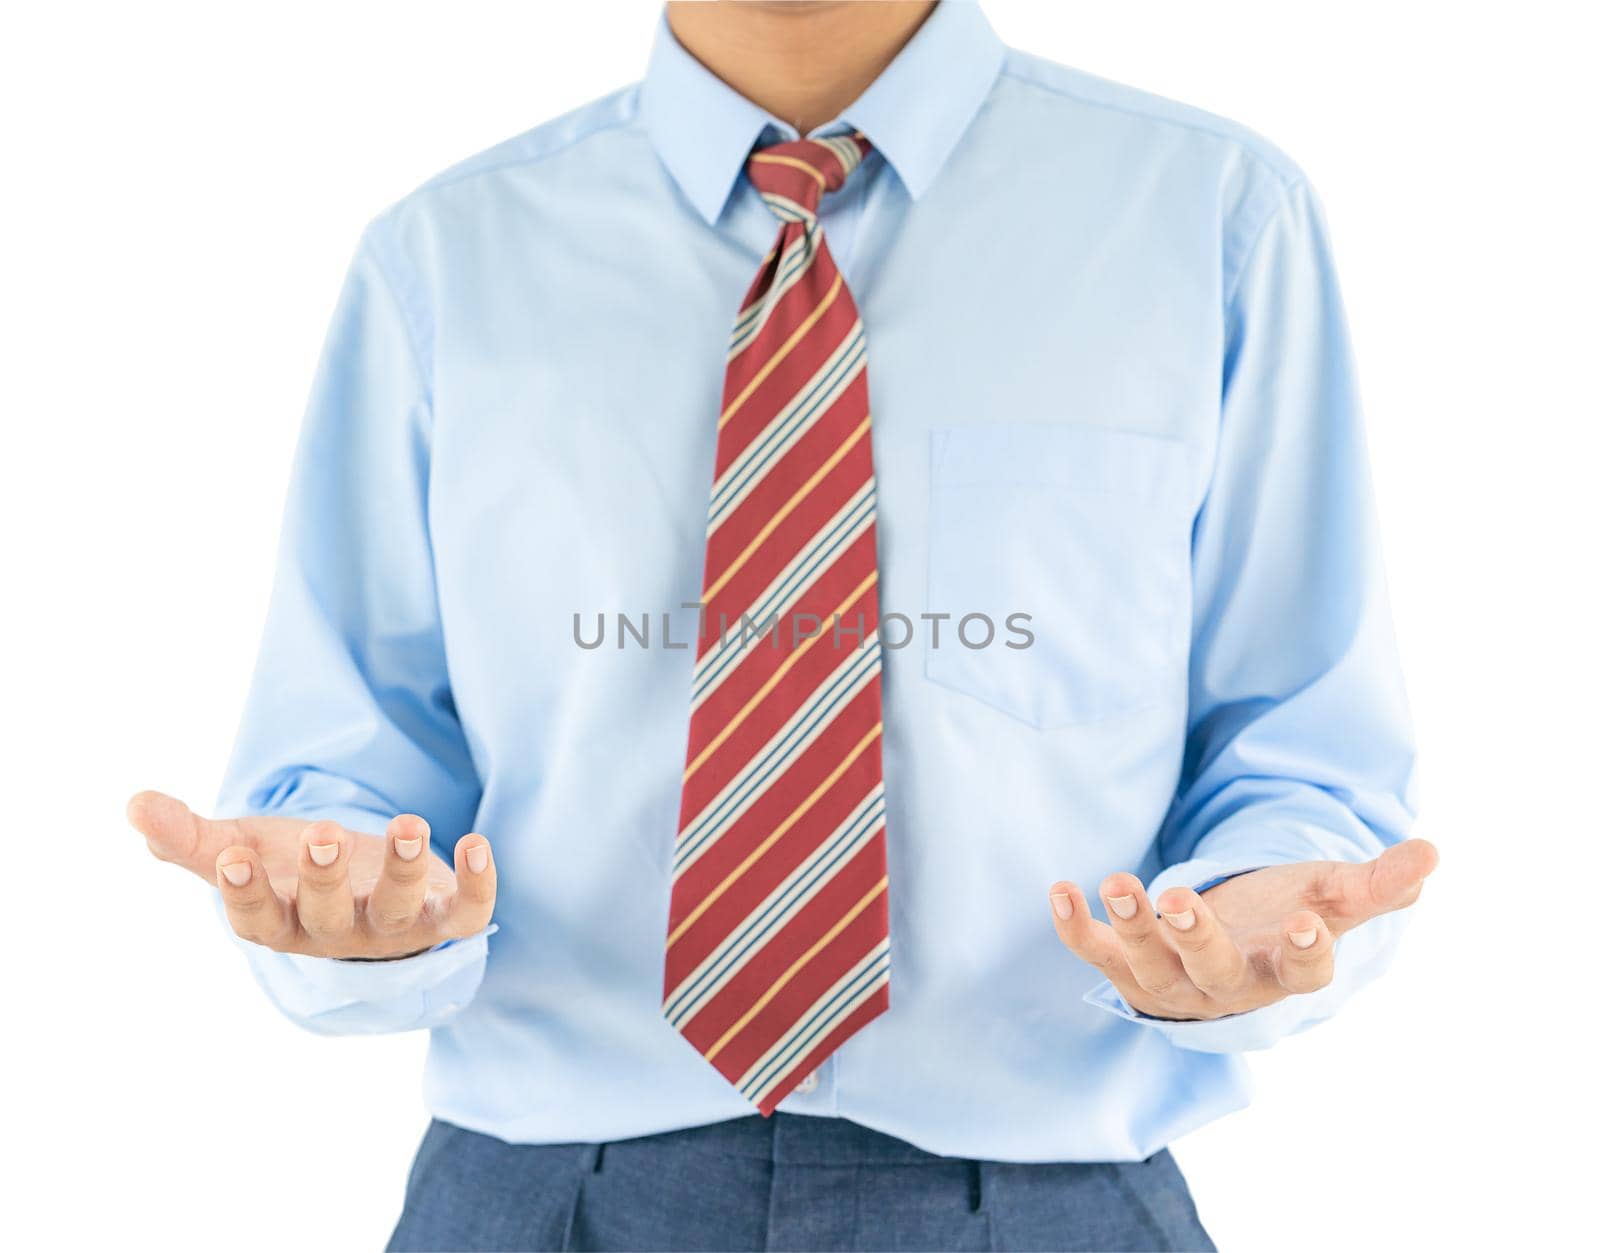 Male wearing blue shirt reaching hand out with clipping path by stoonn